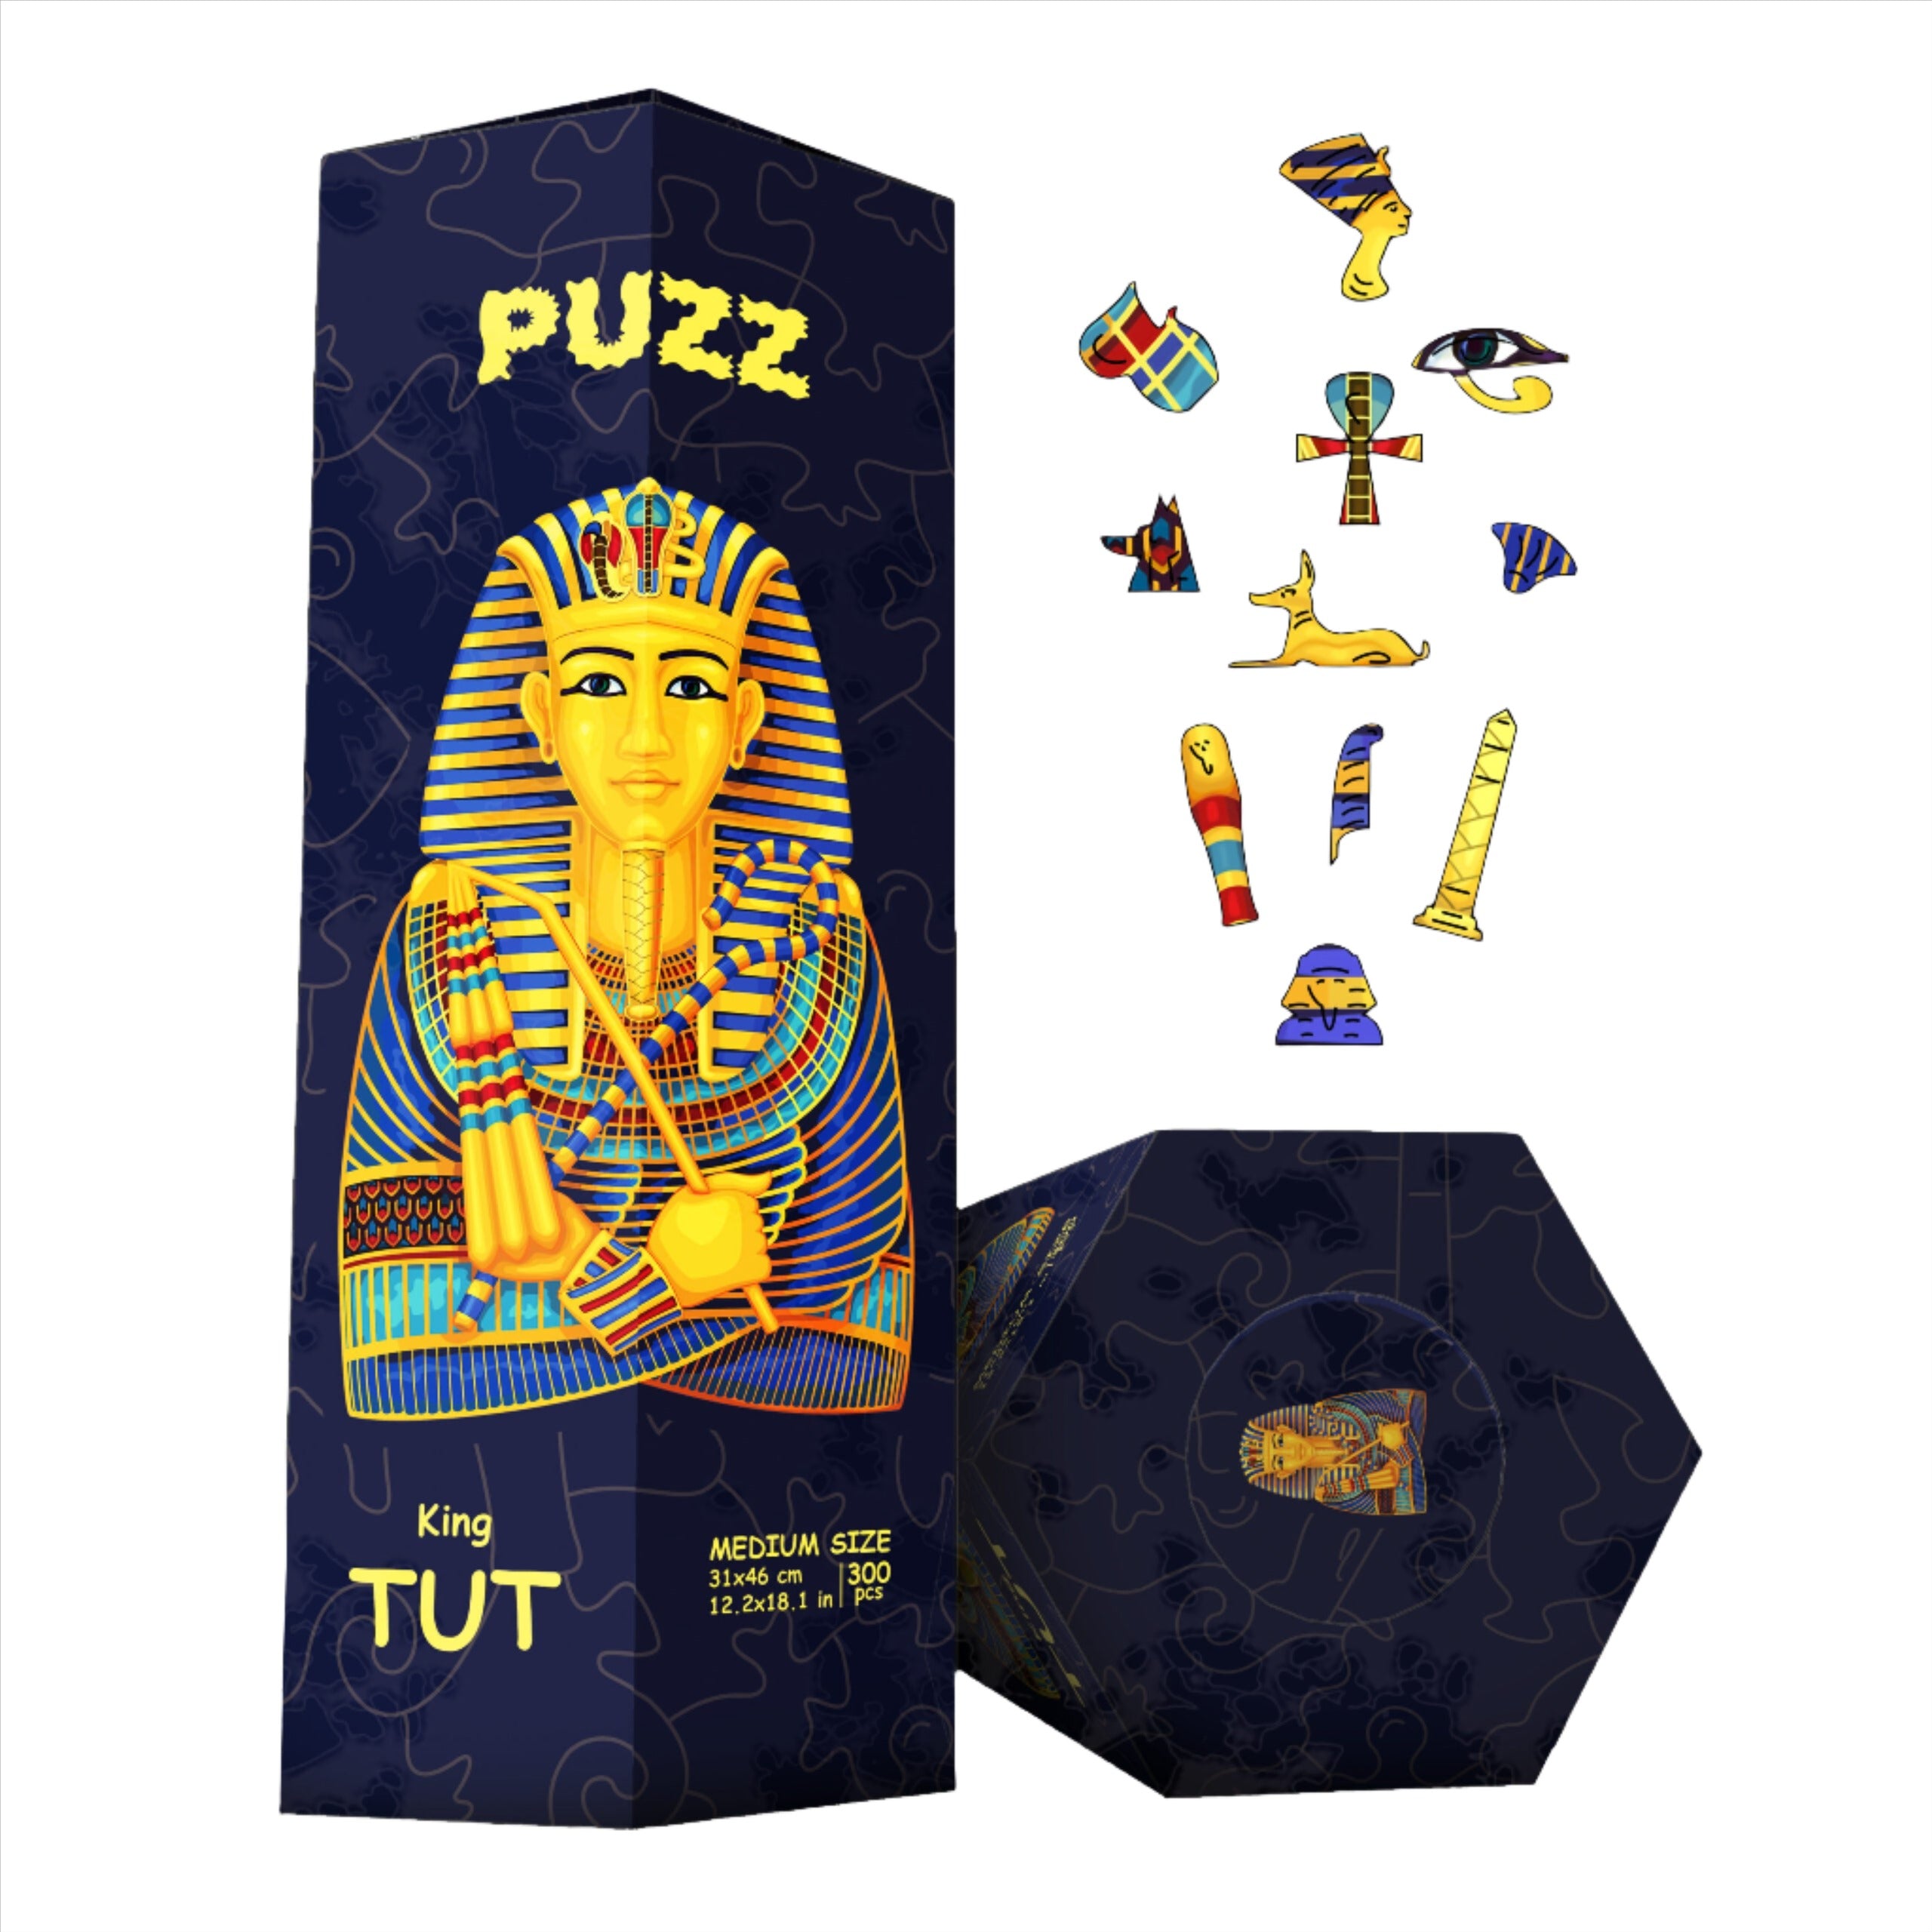 Puzz Wooden Puzzle 300PCS Difficulty Level - King Tut